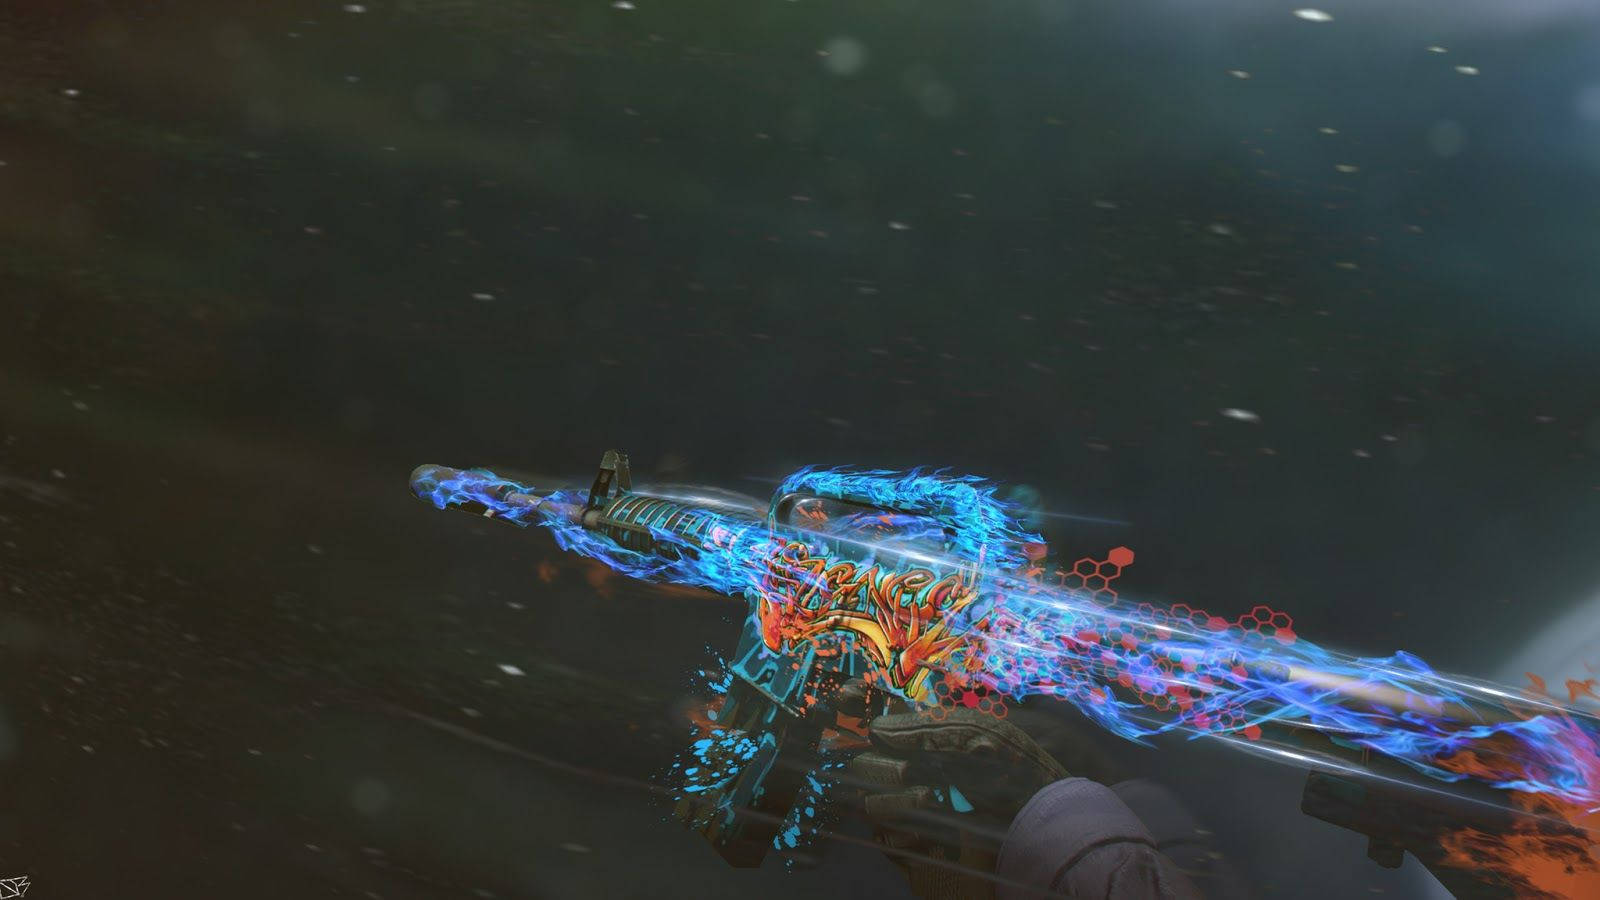 Get ready to dominate the virtual battlefield with this badass CSGO gun Wallpaper